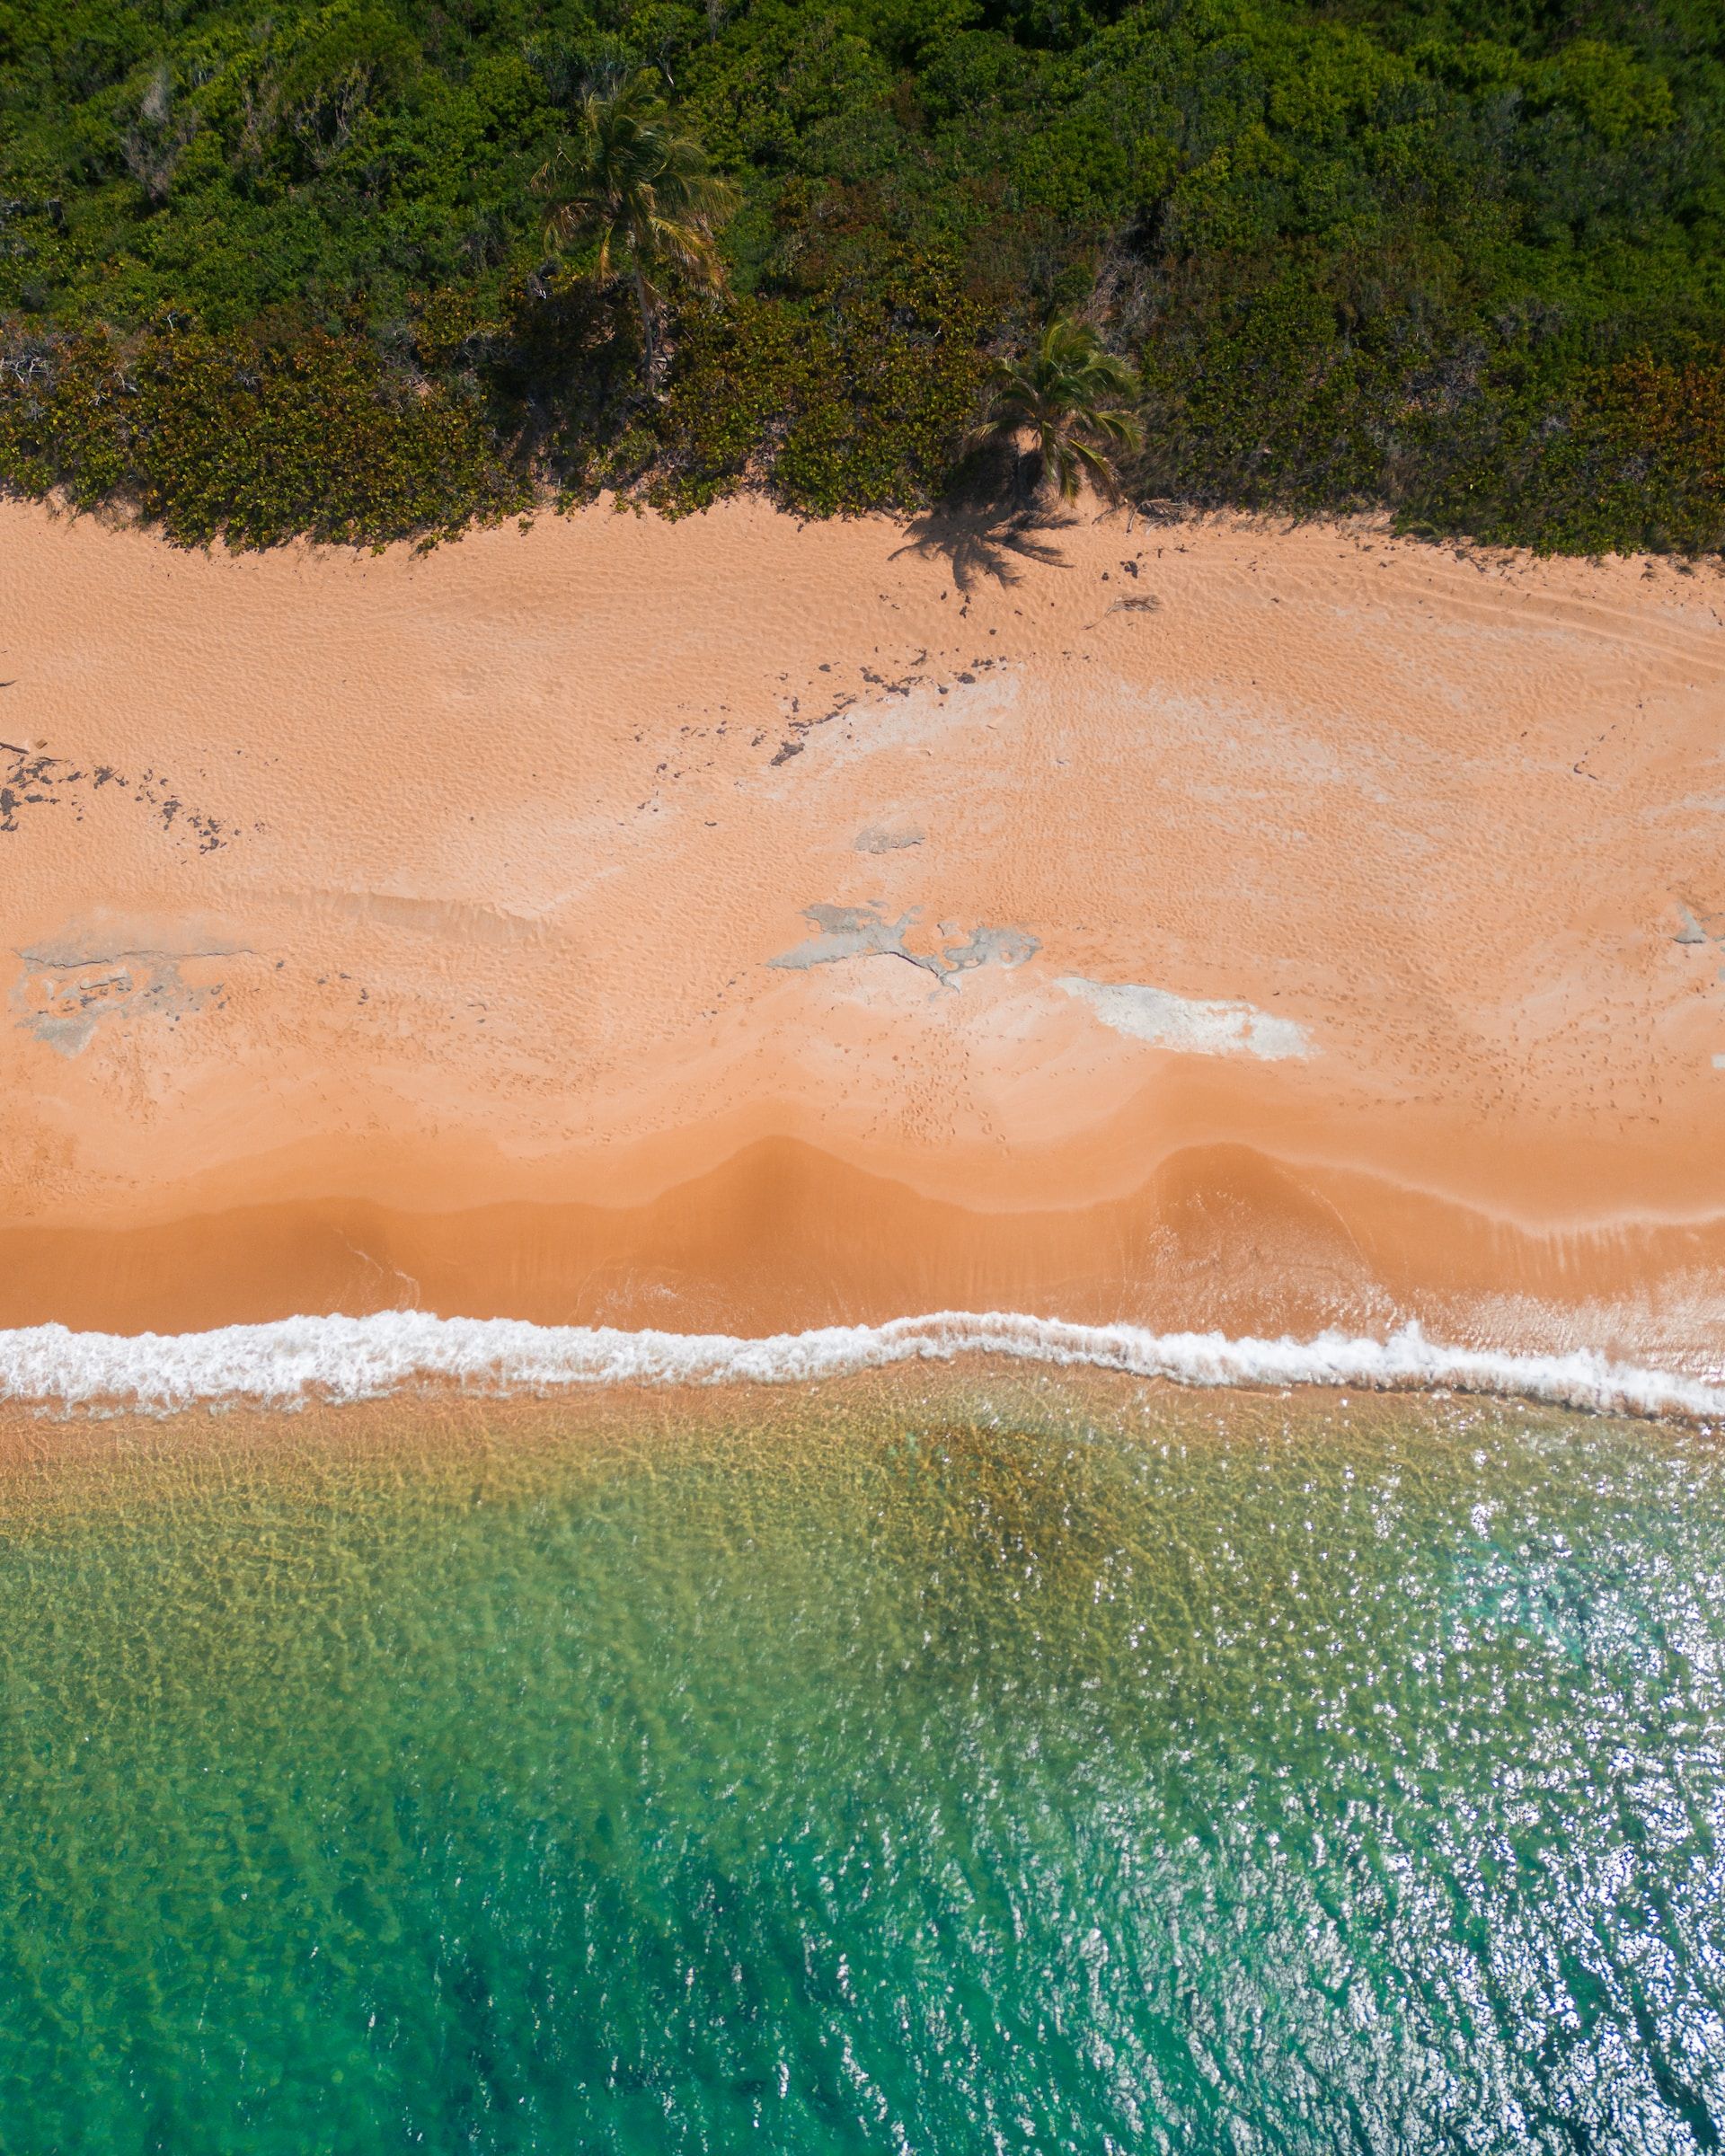 A sandy beach lapped with the green waters in Puerto Rico